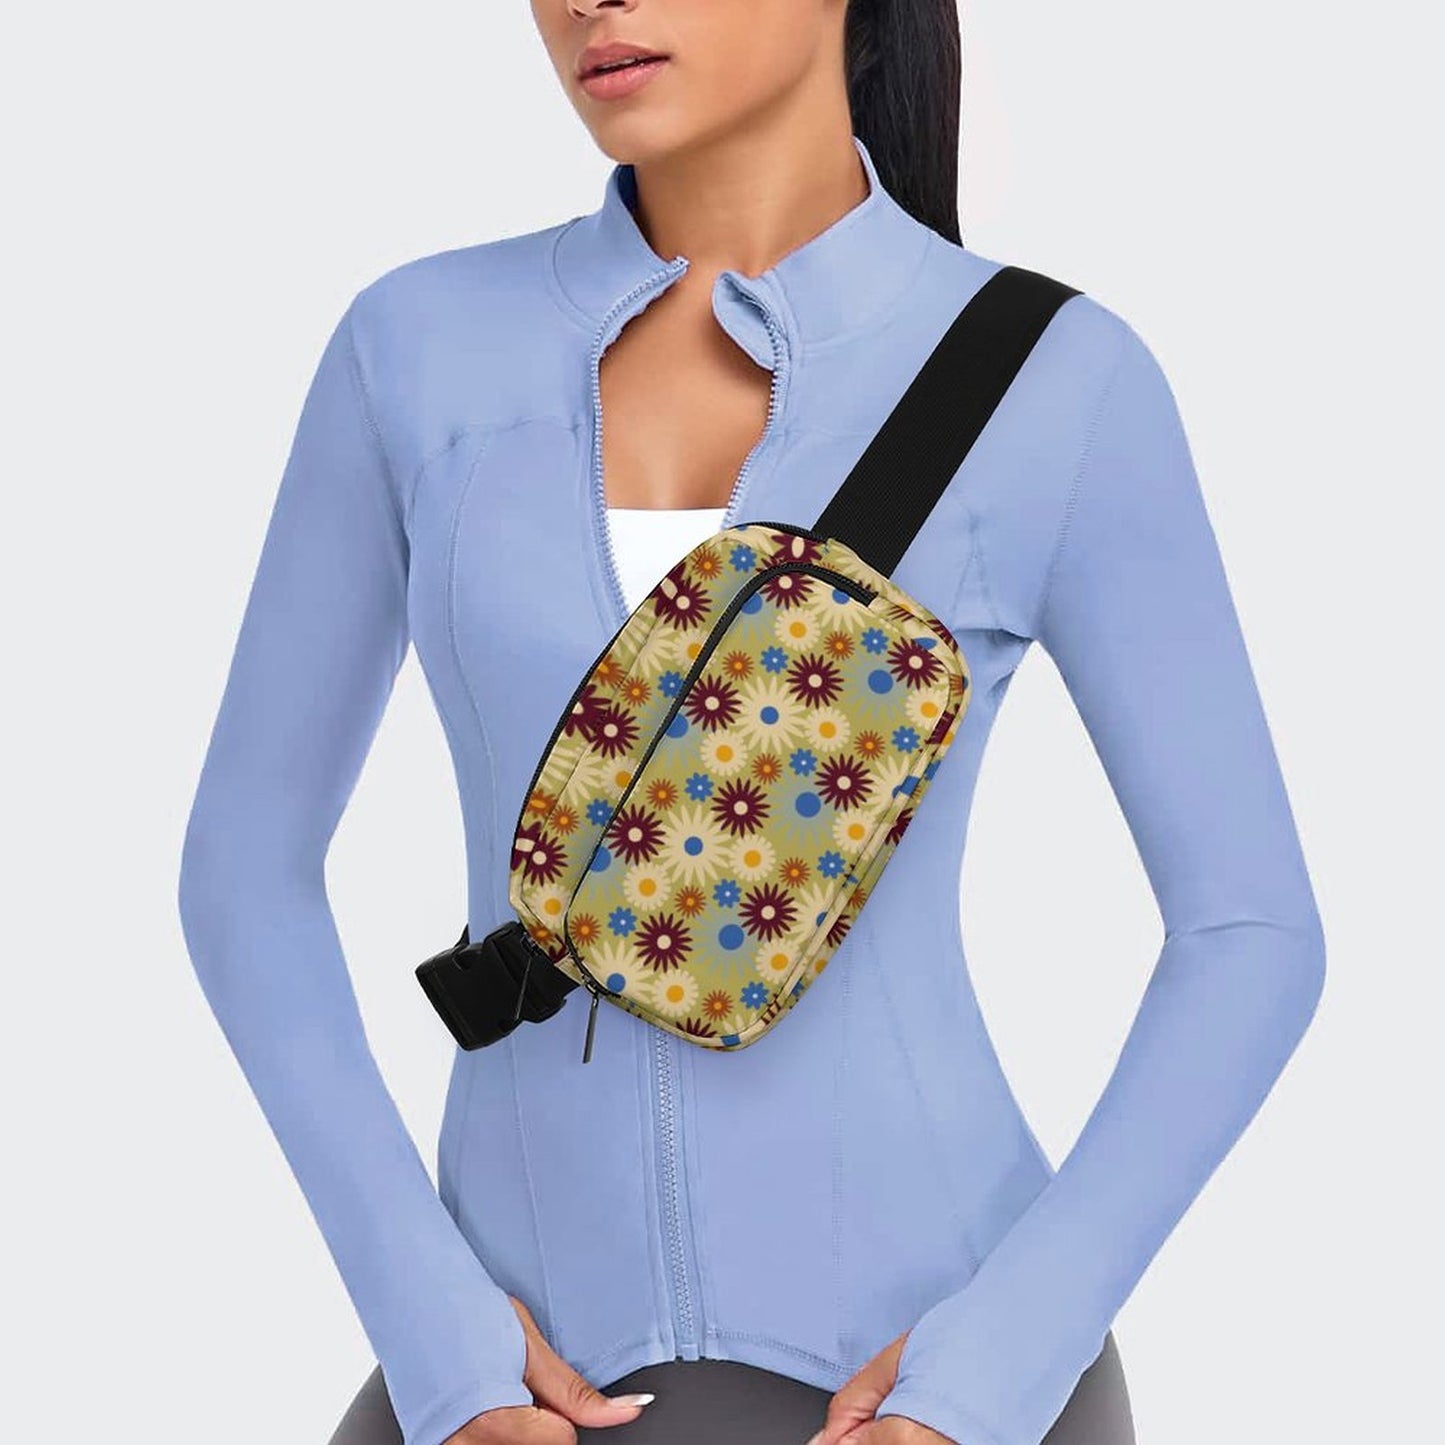 70s Floral Retro | Bum Bag (All-Over Printing)